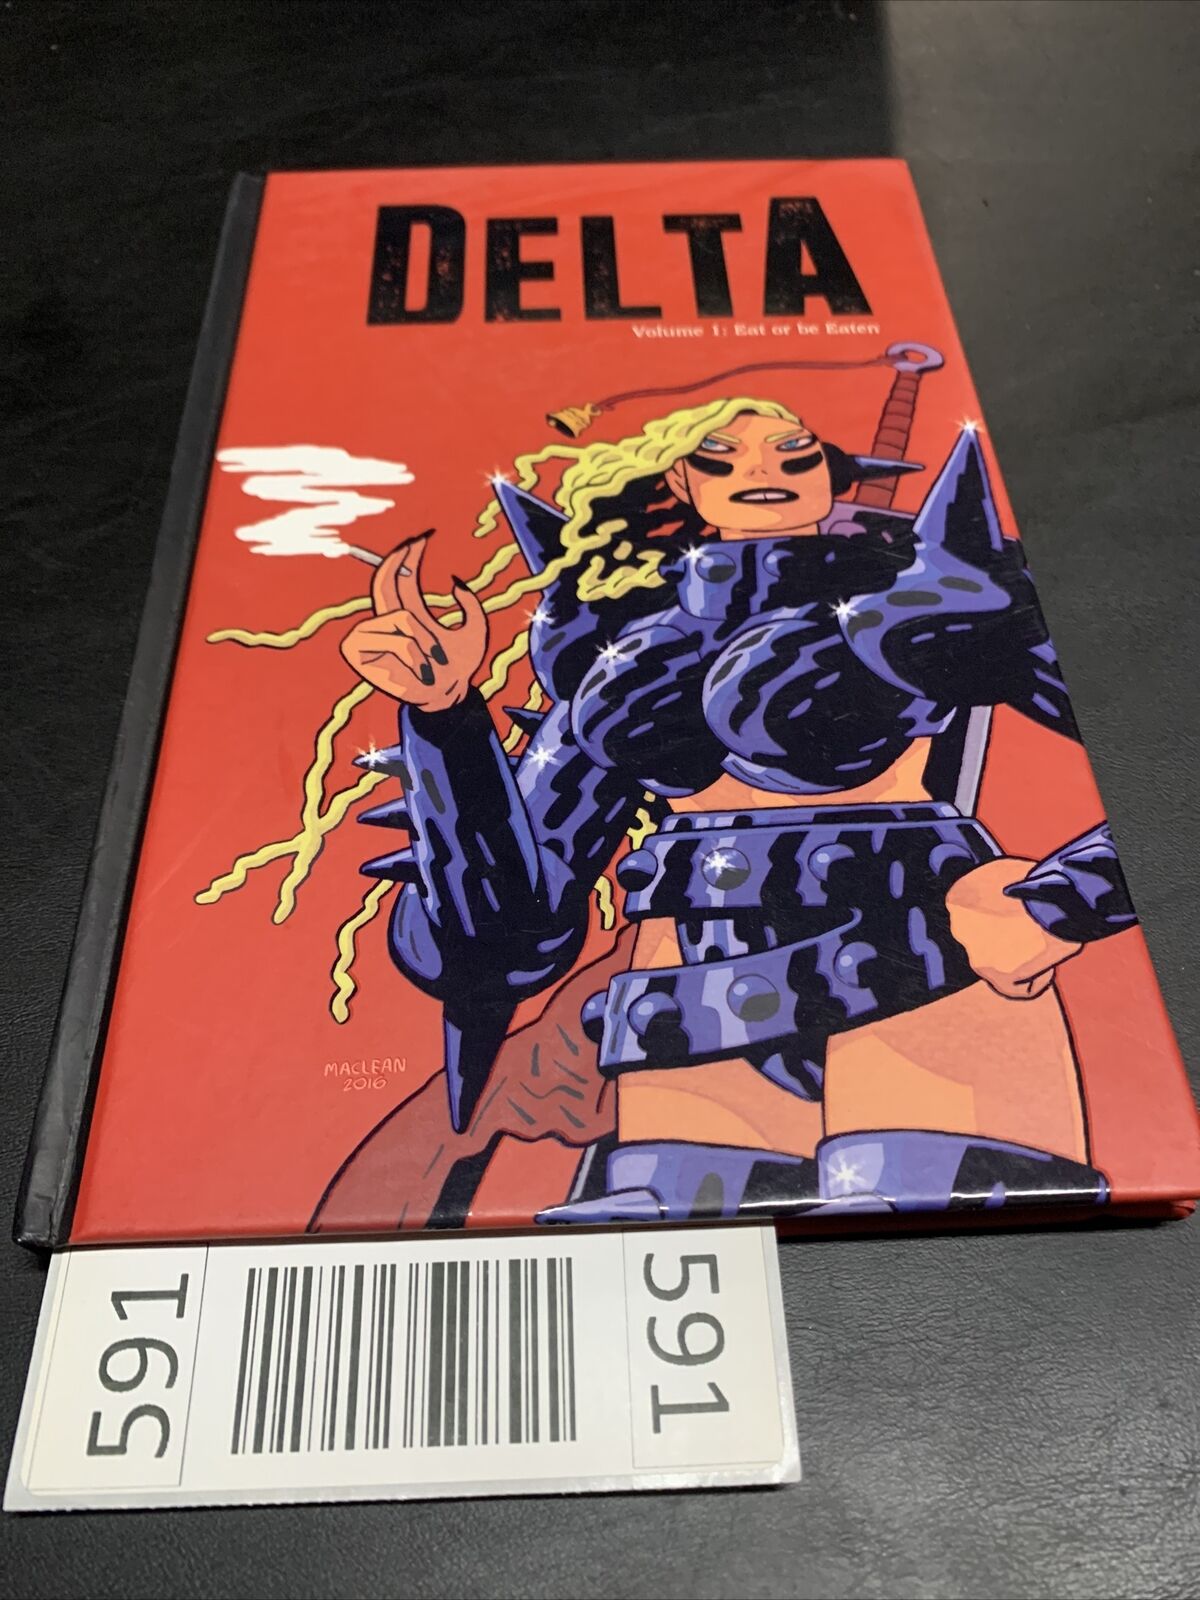 2017 Delta VOLUME 1:EAT OR BE EATEN Hard Cover (SIGNED)By Ryan Nichols.